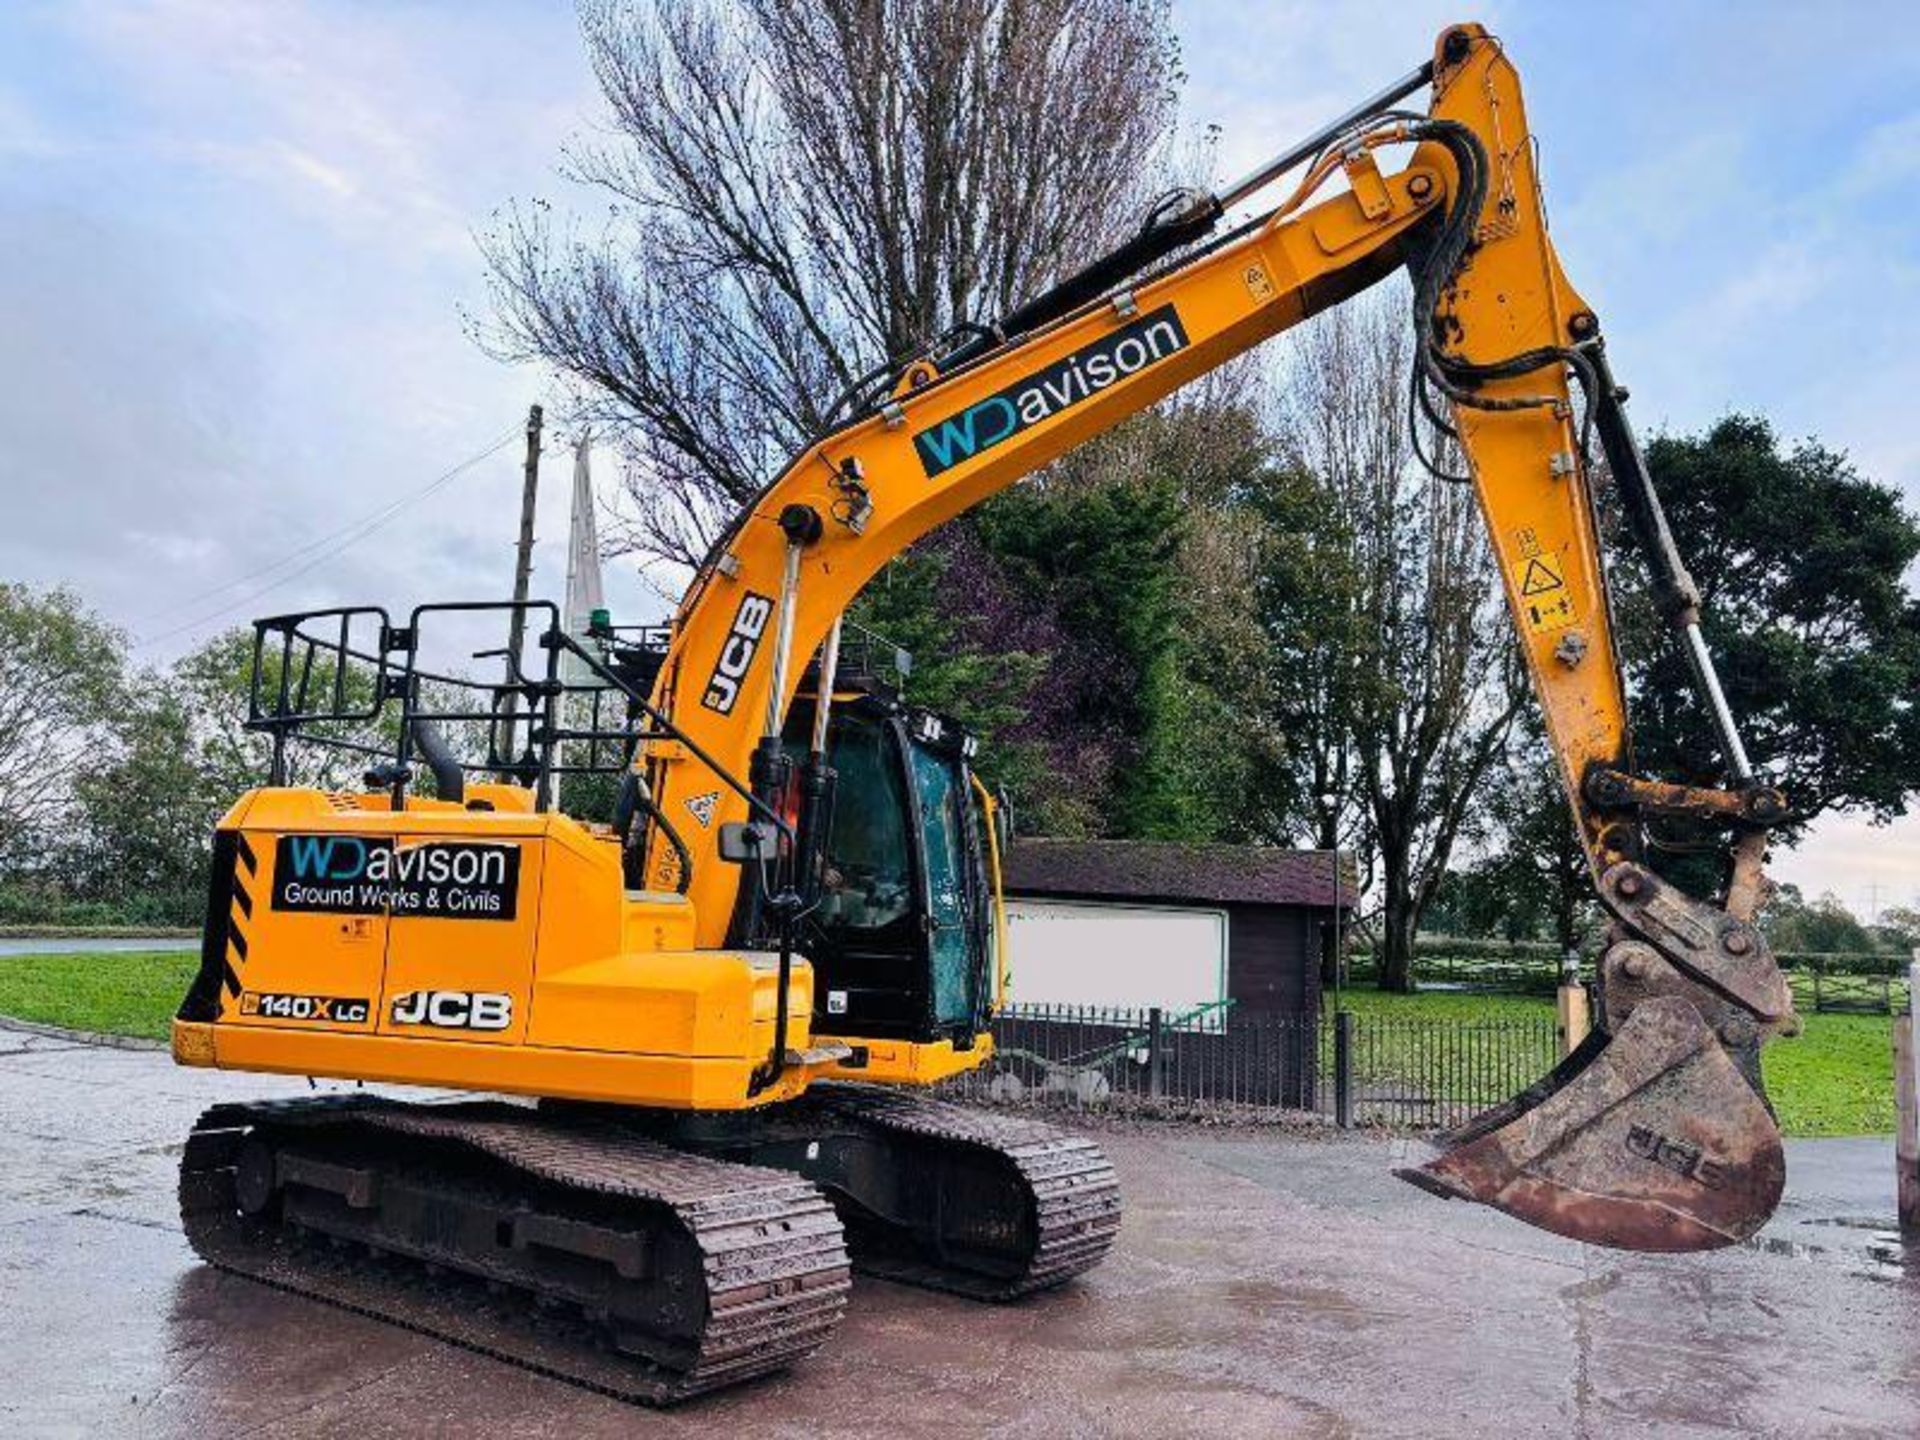 JCB 140XLC TRACKED EXCAVATOR *YEAR 2020, 3774 HOURS* C/W QUICK HITCH - Image 4 of 19